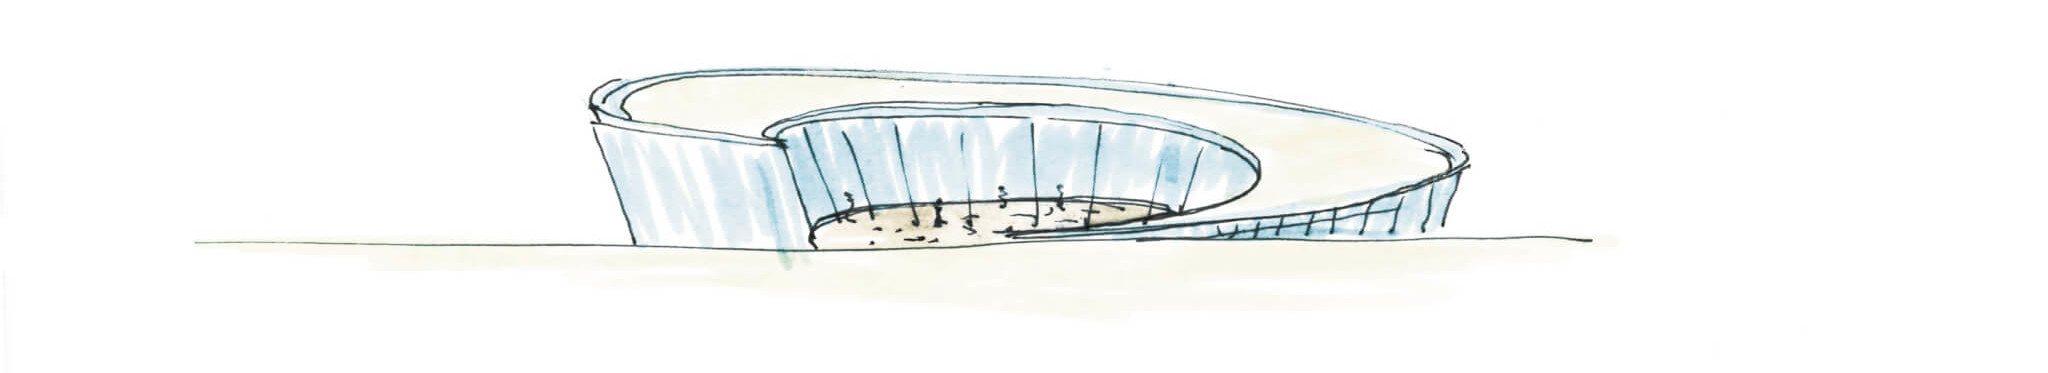 illustration of a conical circular building